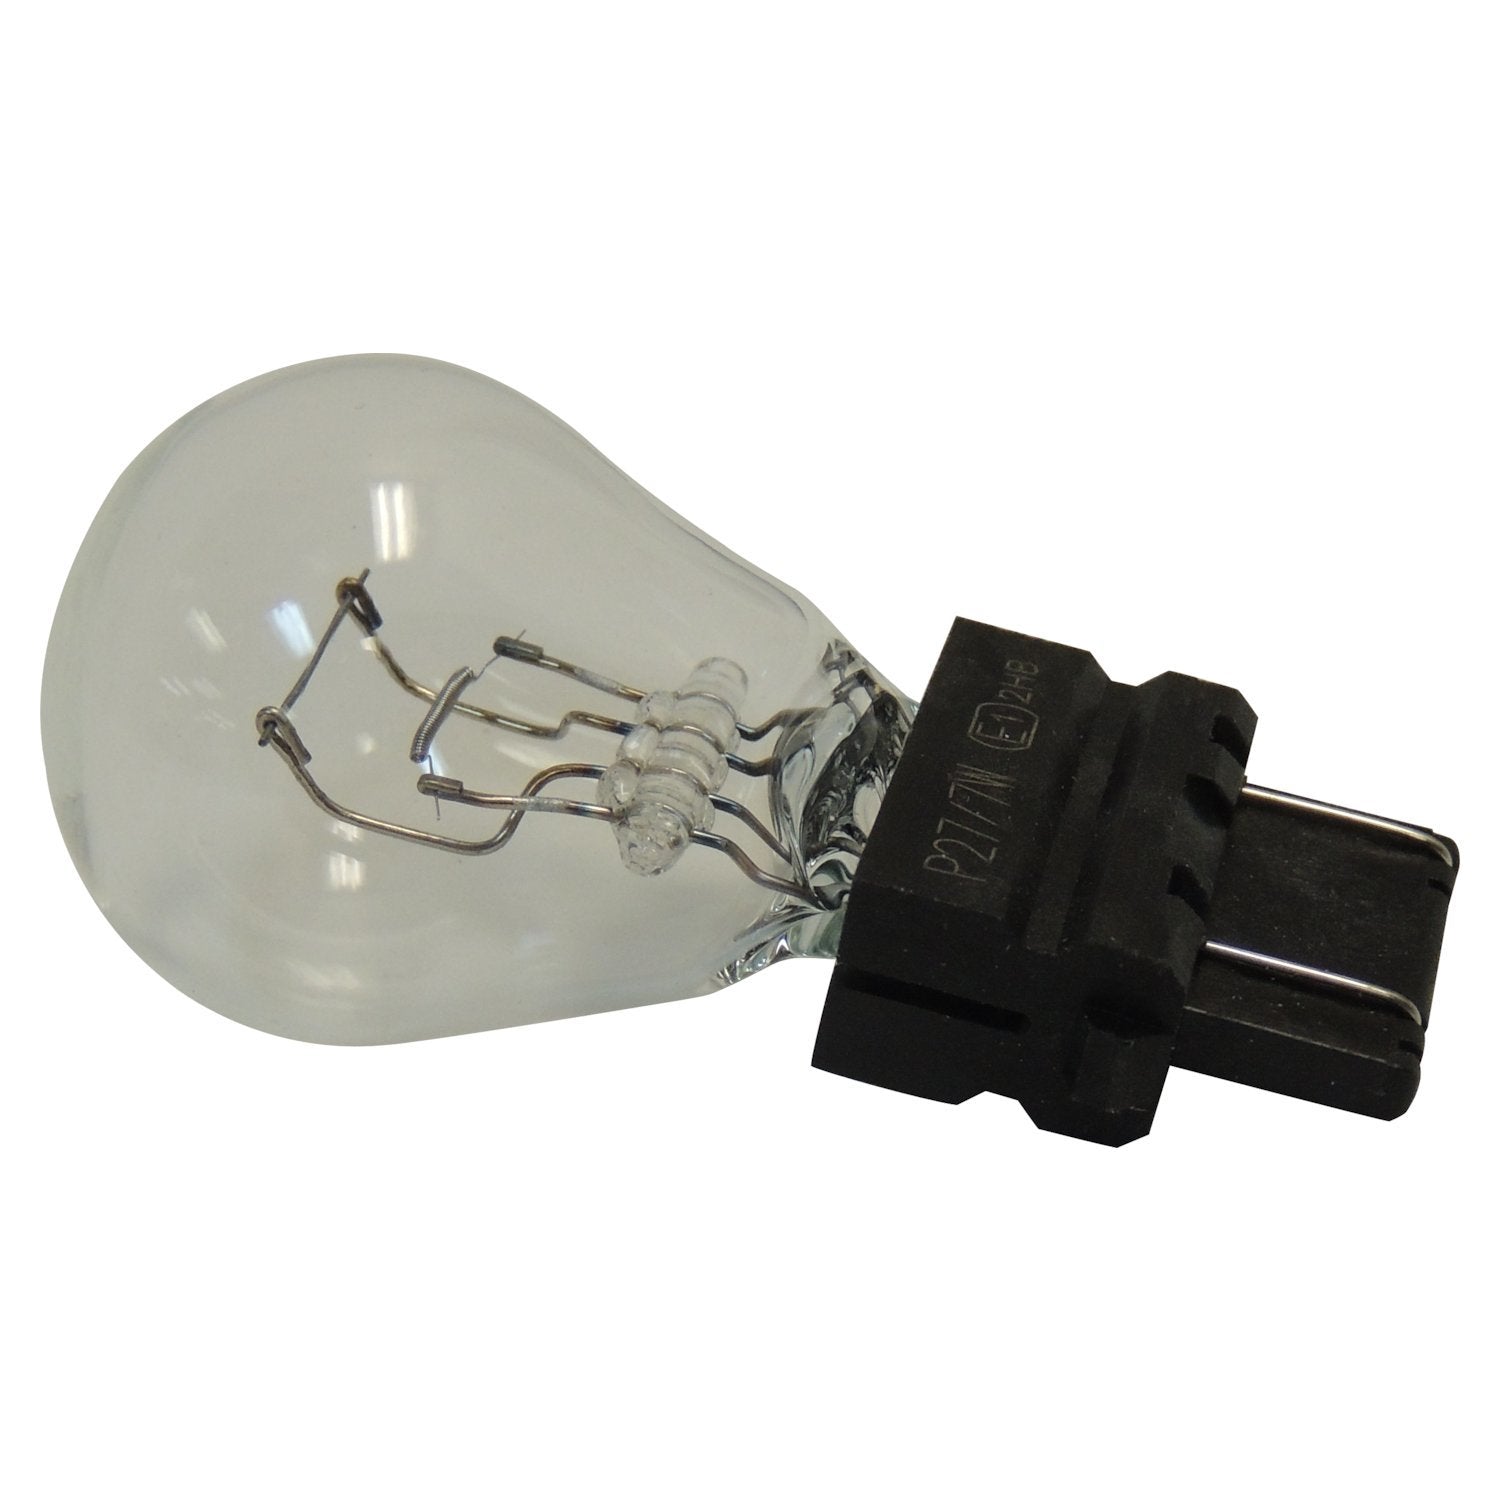 Bulb, Replacement for 3157, Fits Multiple Jeep, Dodge, Chrysler & Dodge Models